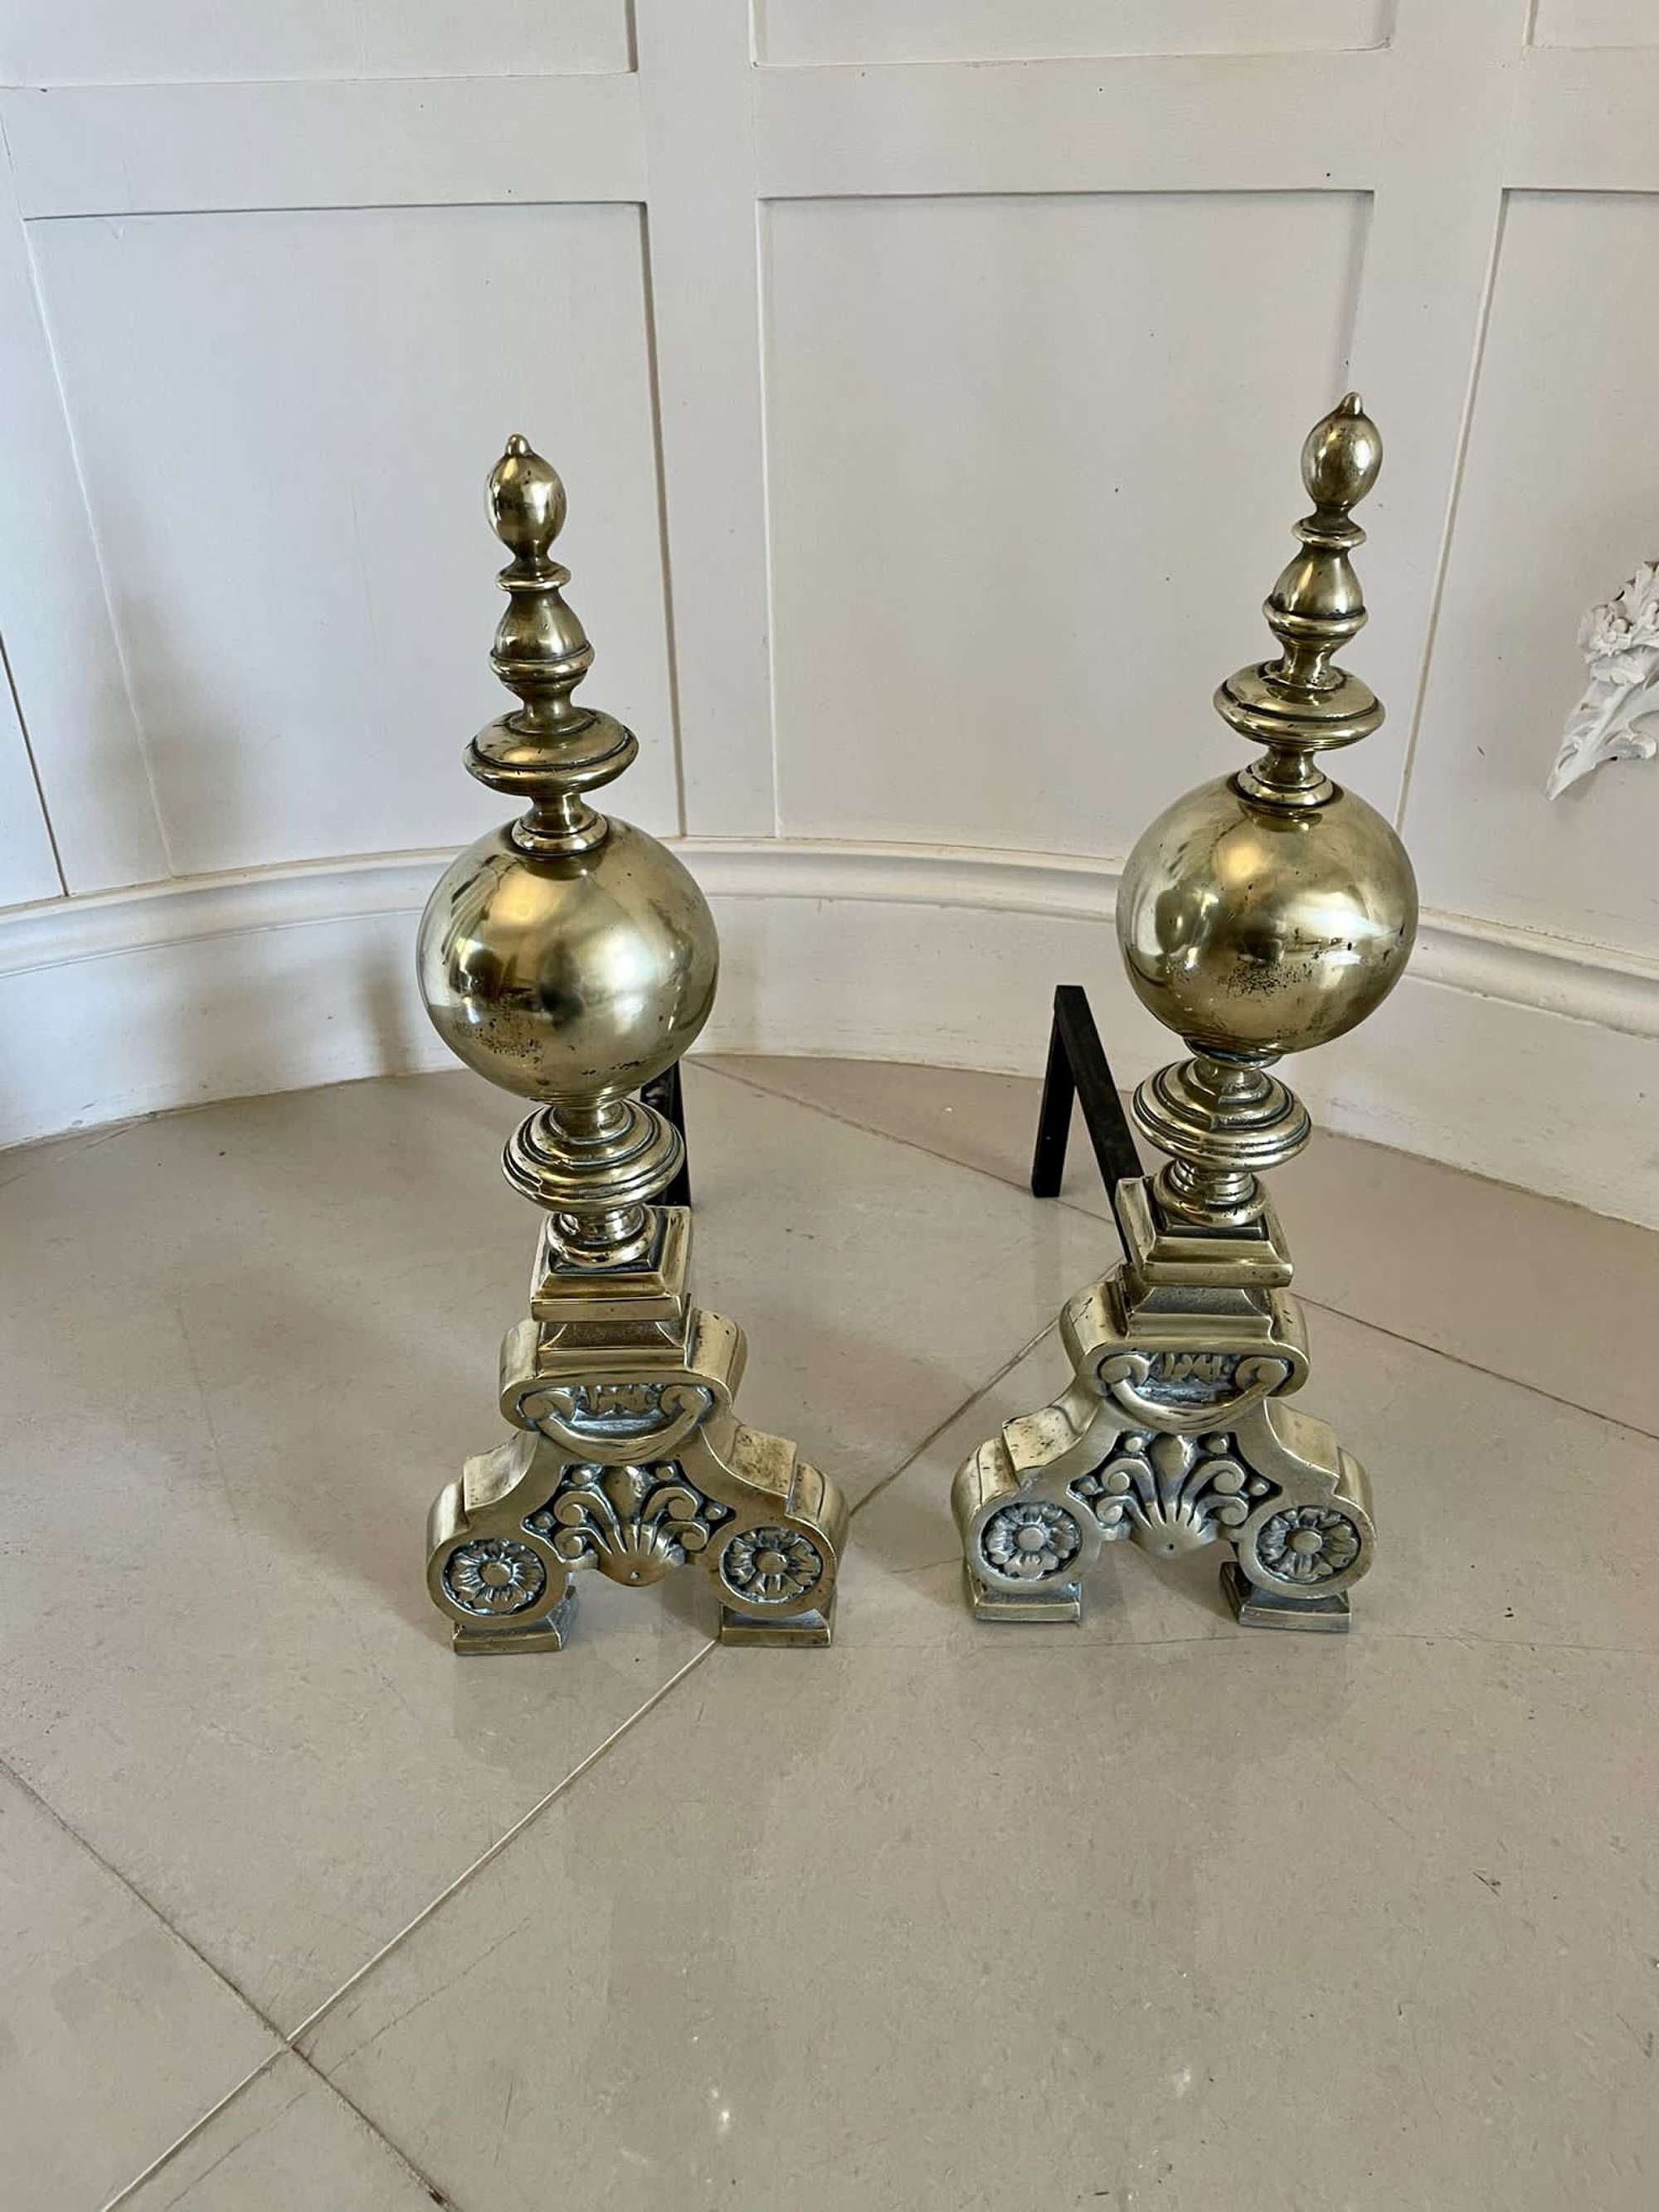 Superb Quality Ornate Antique Victorian Pair Of Brass Fire Dogs